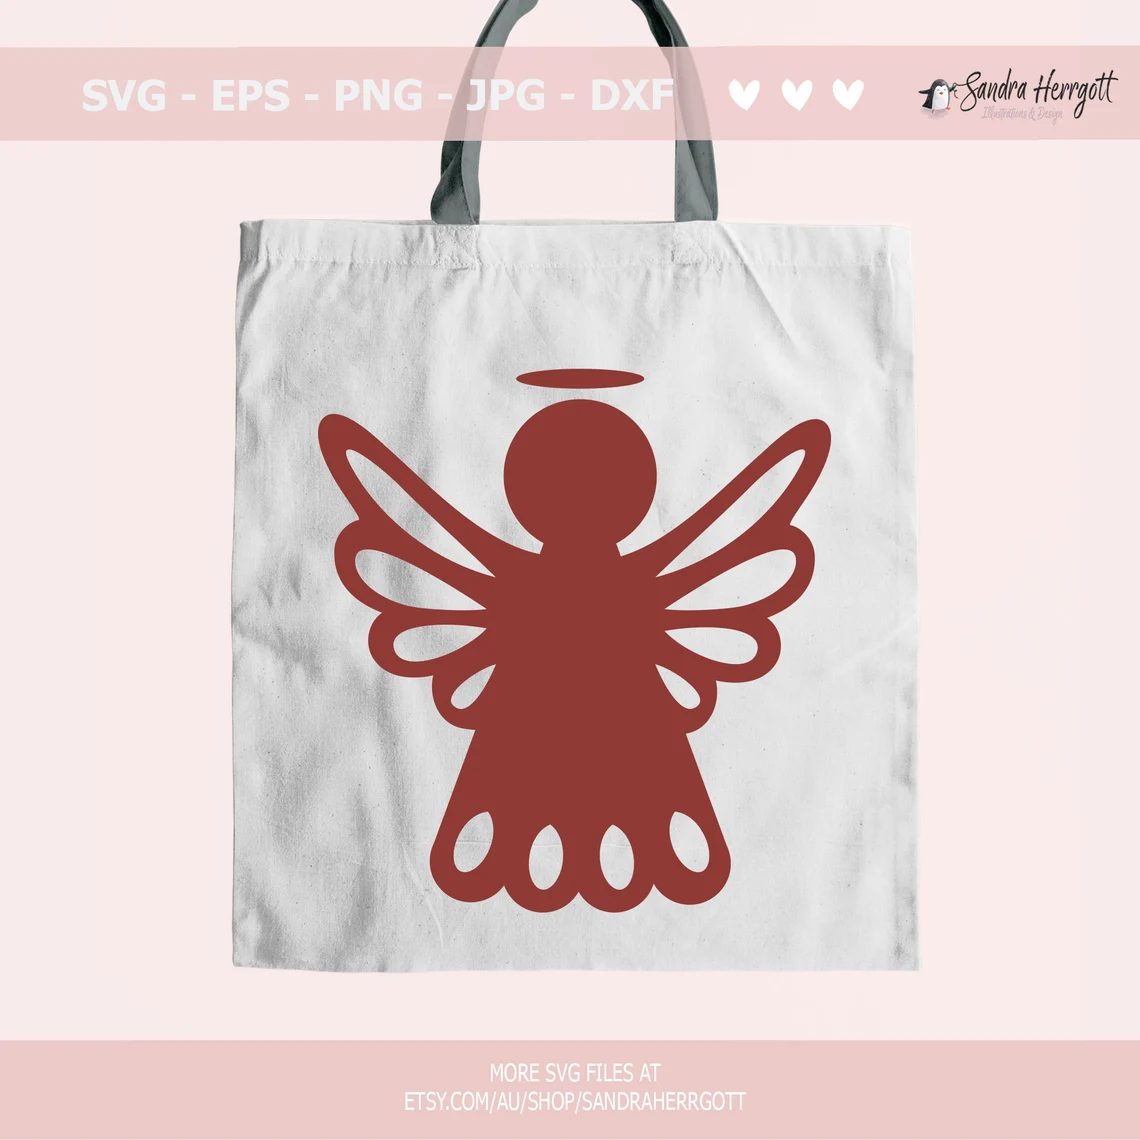 Red angel with wings on the bag.